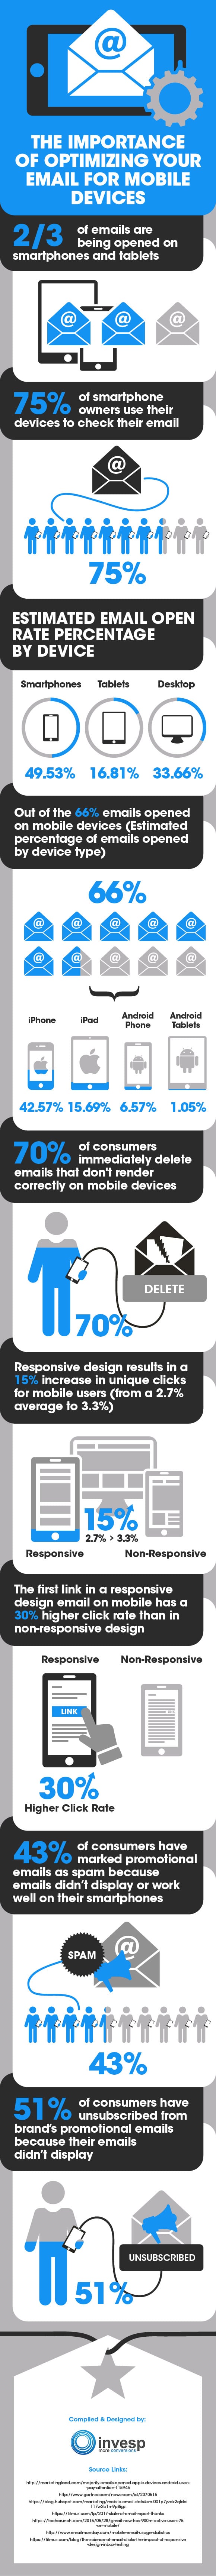 E-mail mobile optimization - Statistics and Trends